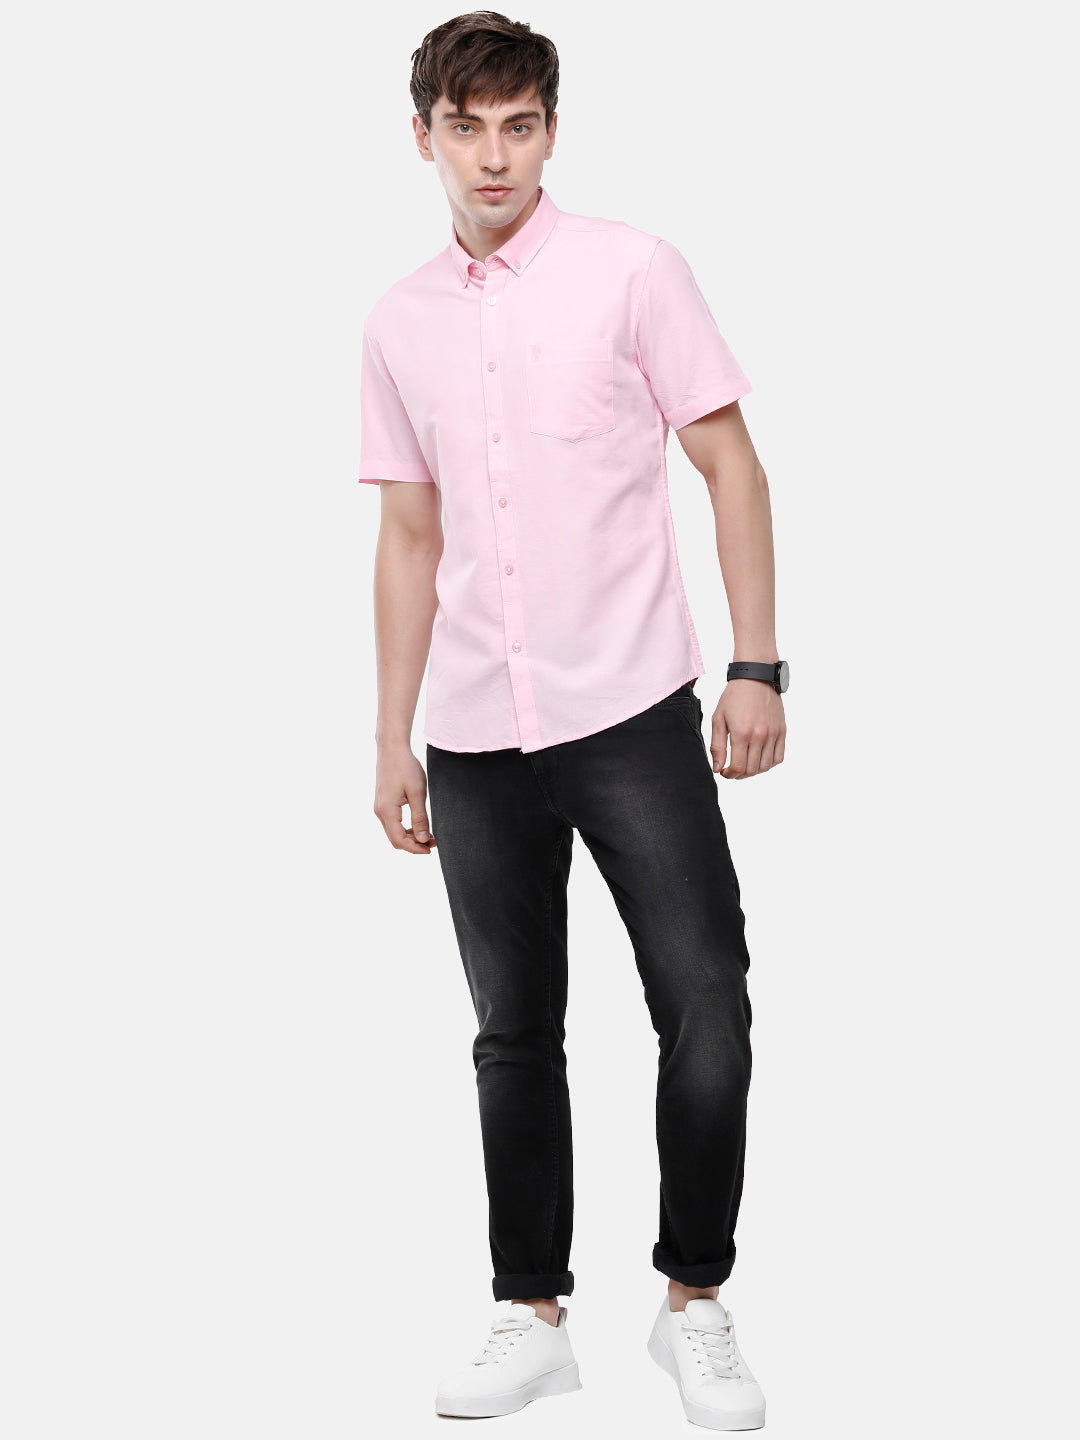 Classic Polo Men's Cotton Pink Solid Half Sleeve Shirt - Enzo-Pink-Mf ...